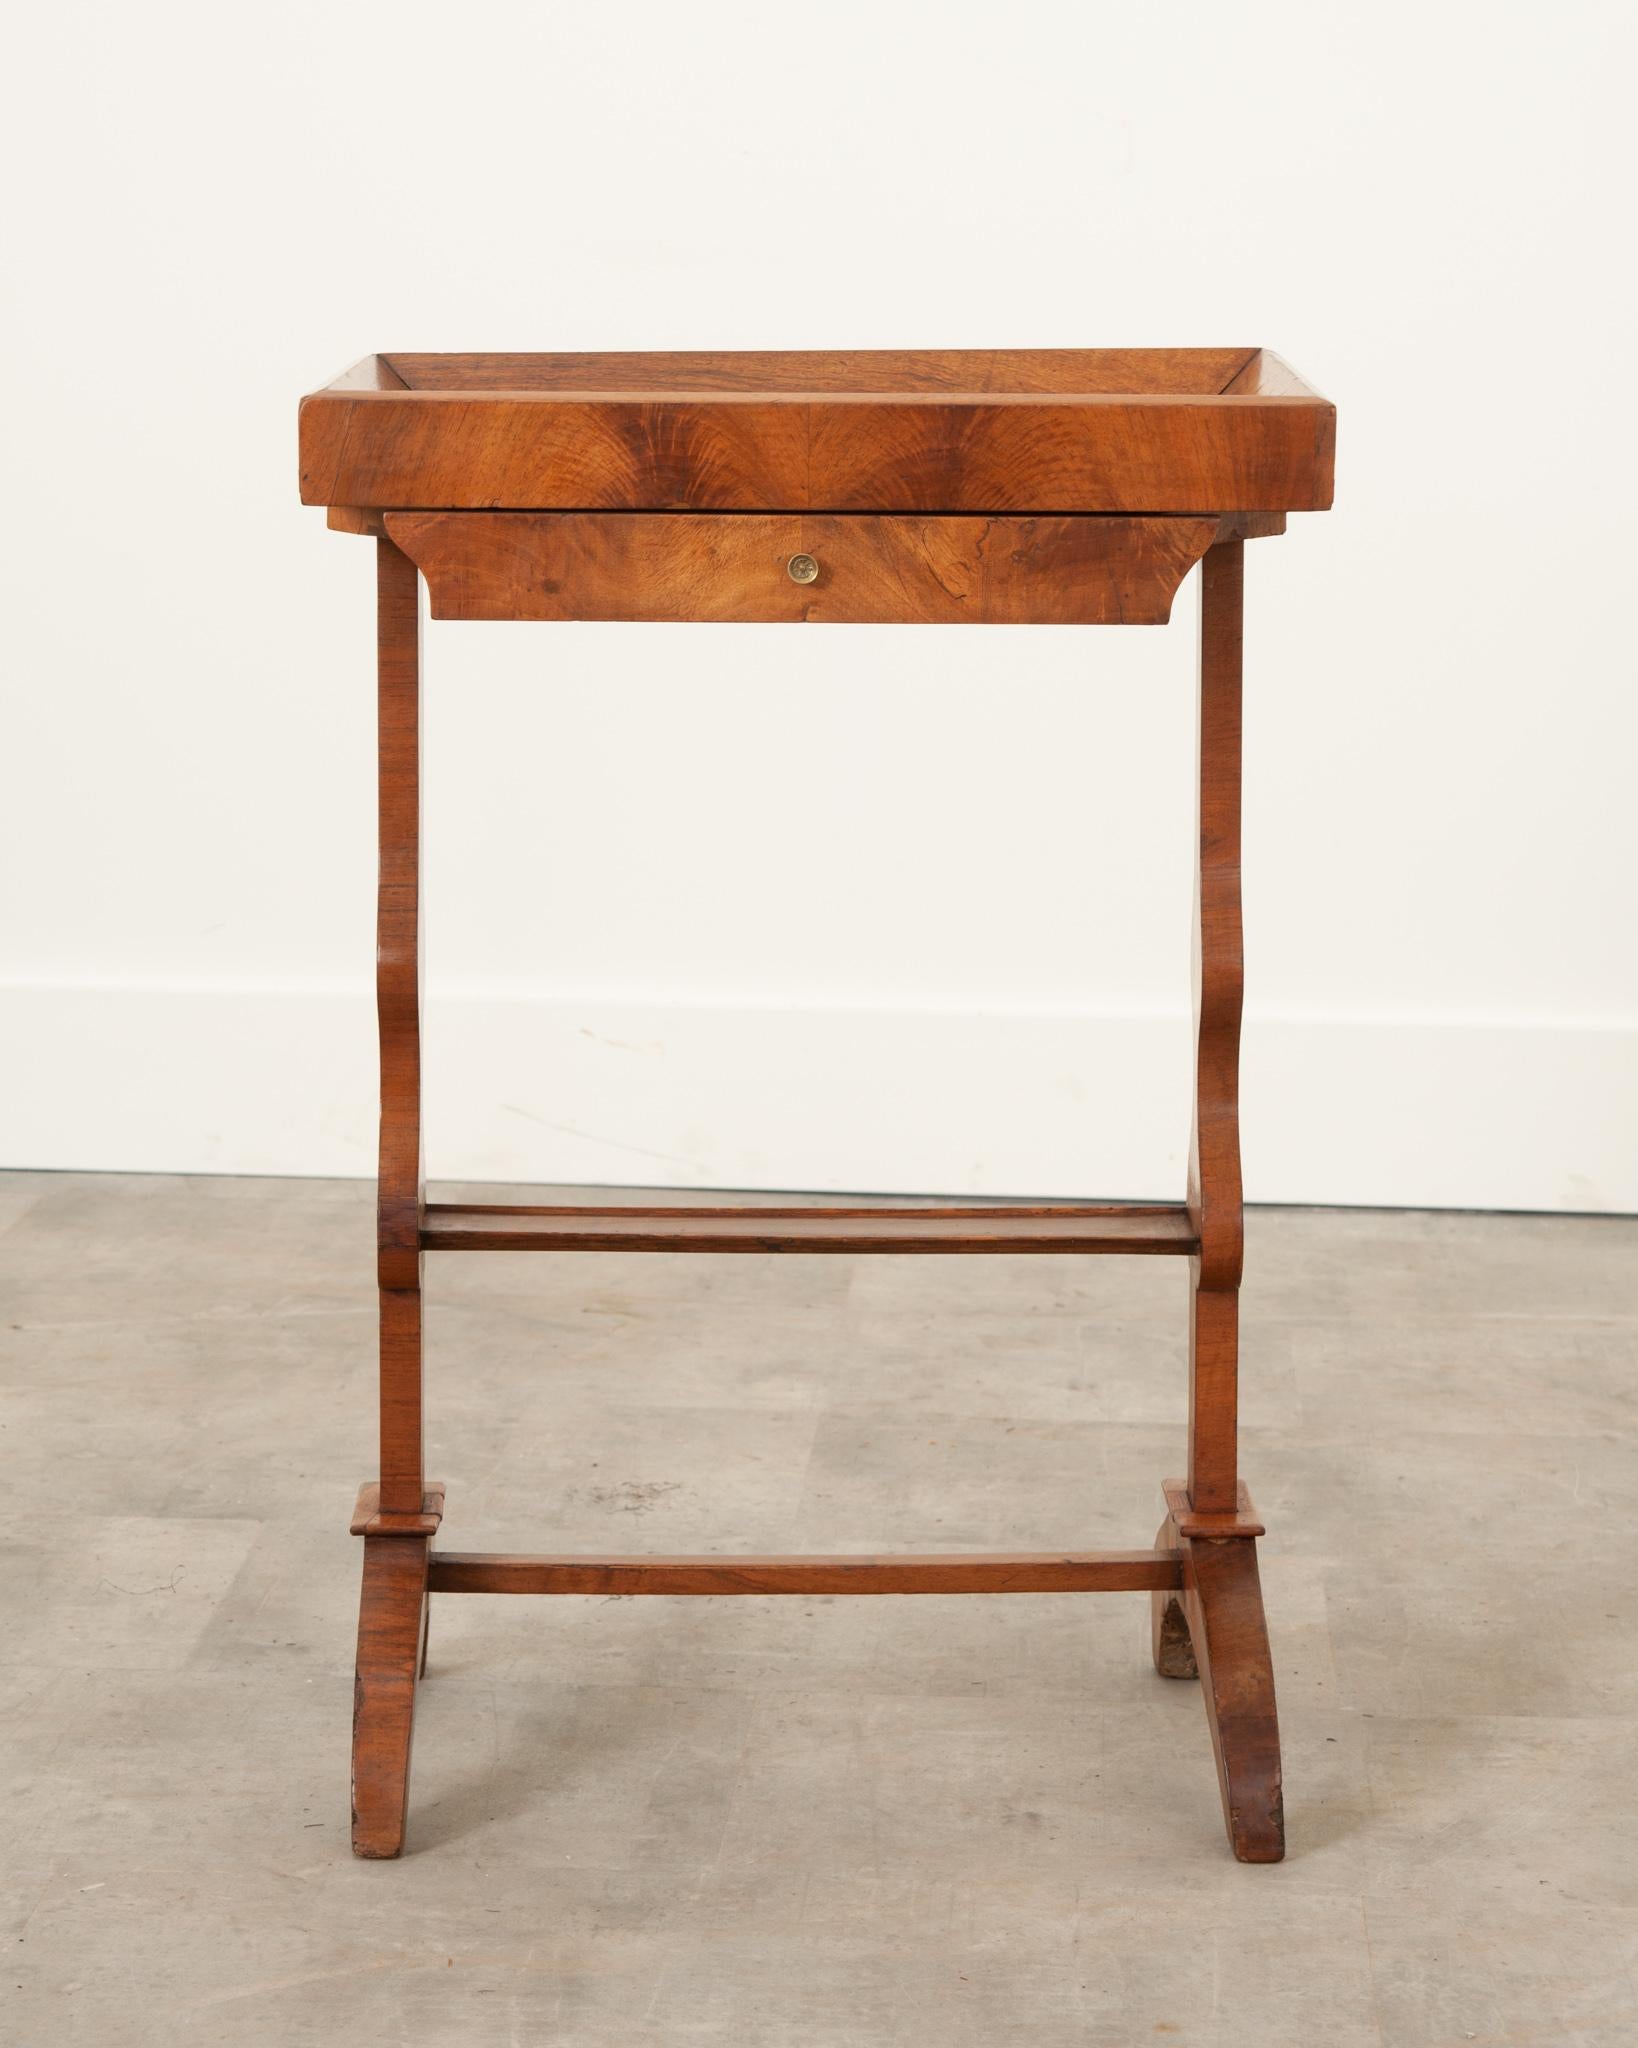 A delightful solid walnut accent table from 19th Century France. Incredible expression can be found in the grain throughout the carefully selected walnut. The rectangular table top has a beveled frame extending above the top’s surface, giving the